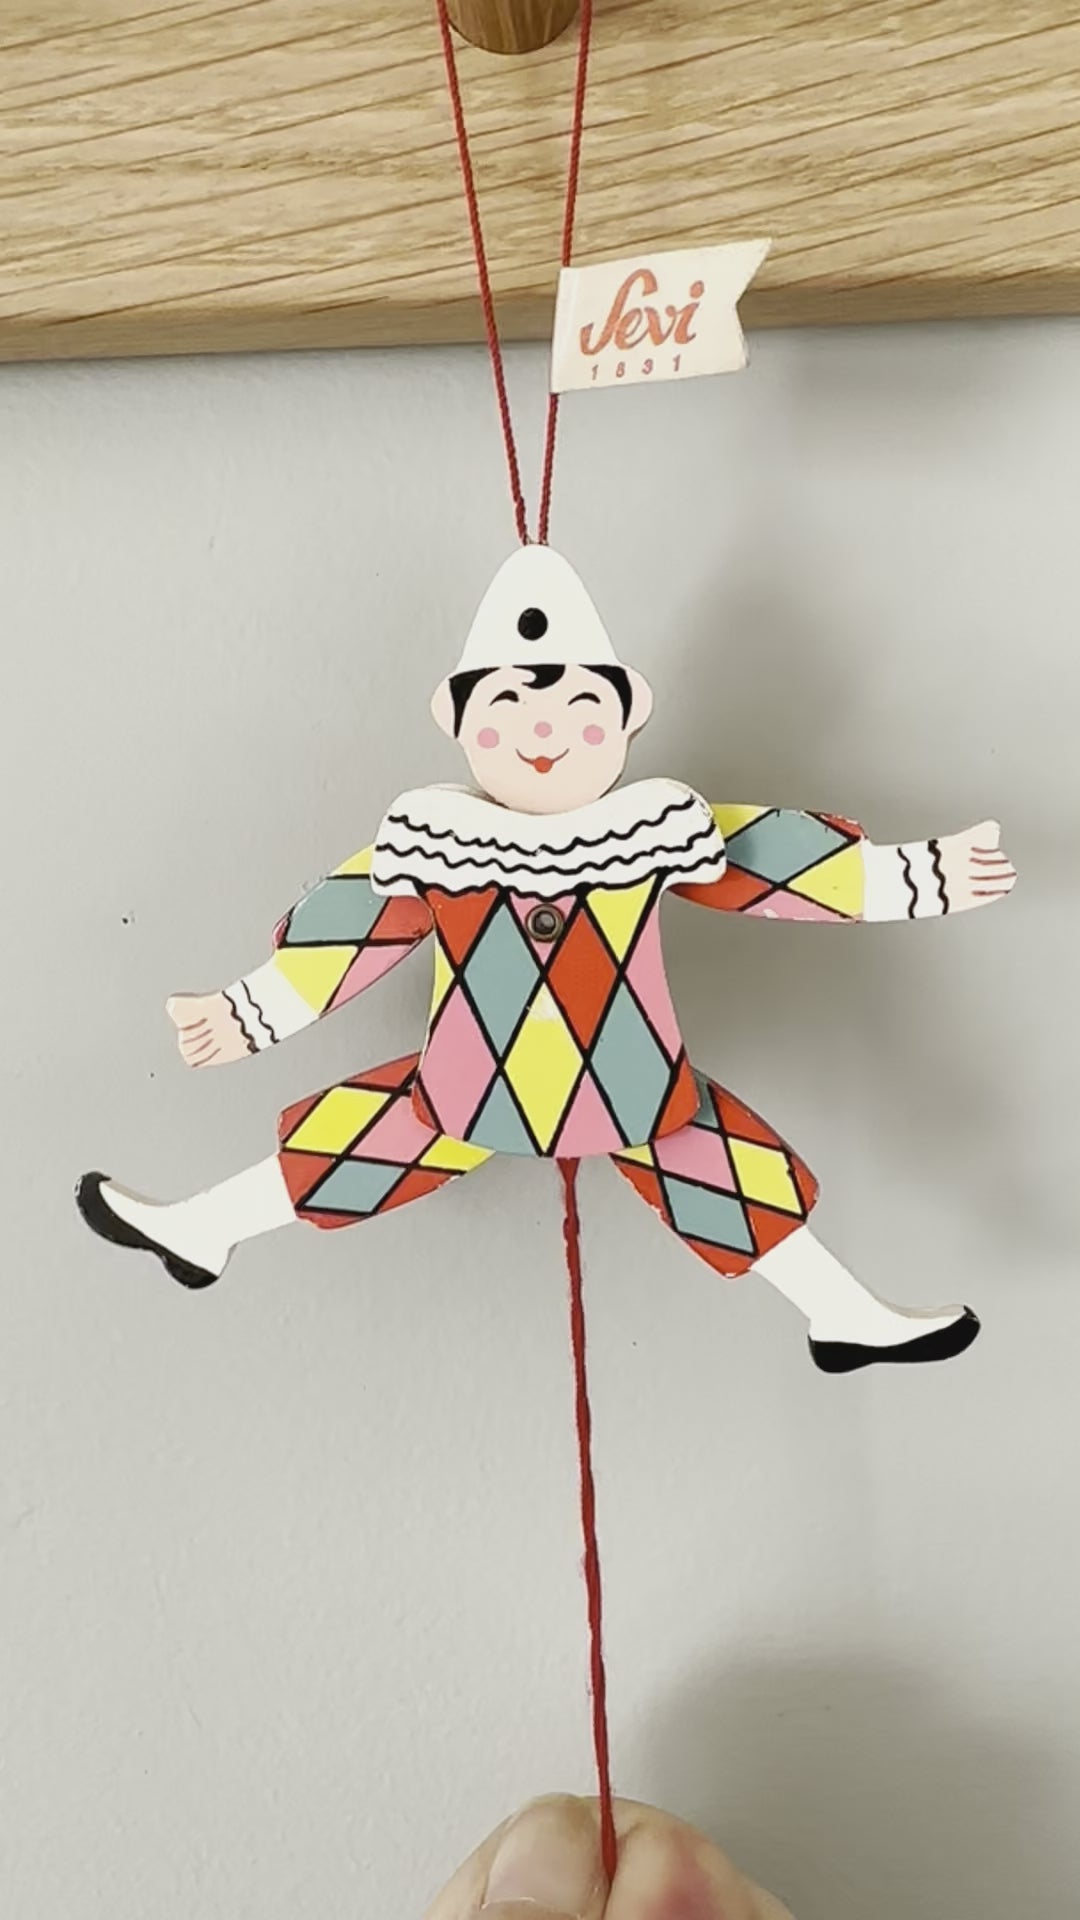 Vintage Italian wooden harlequin clown jumping-jack pull toy, by Sevi 1831